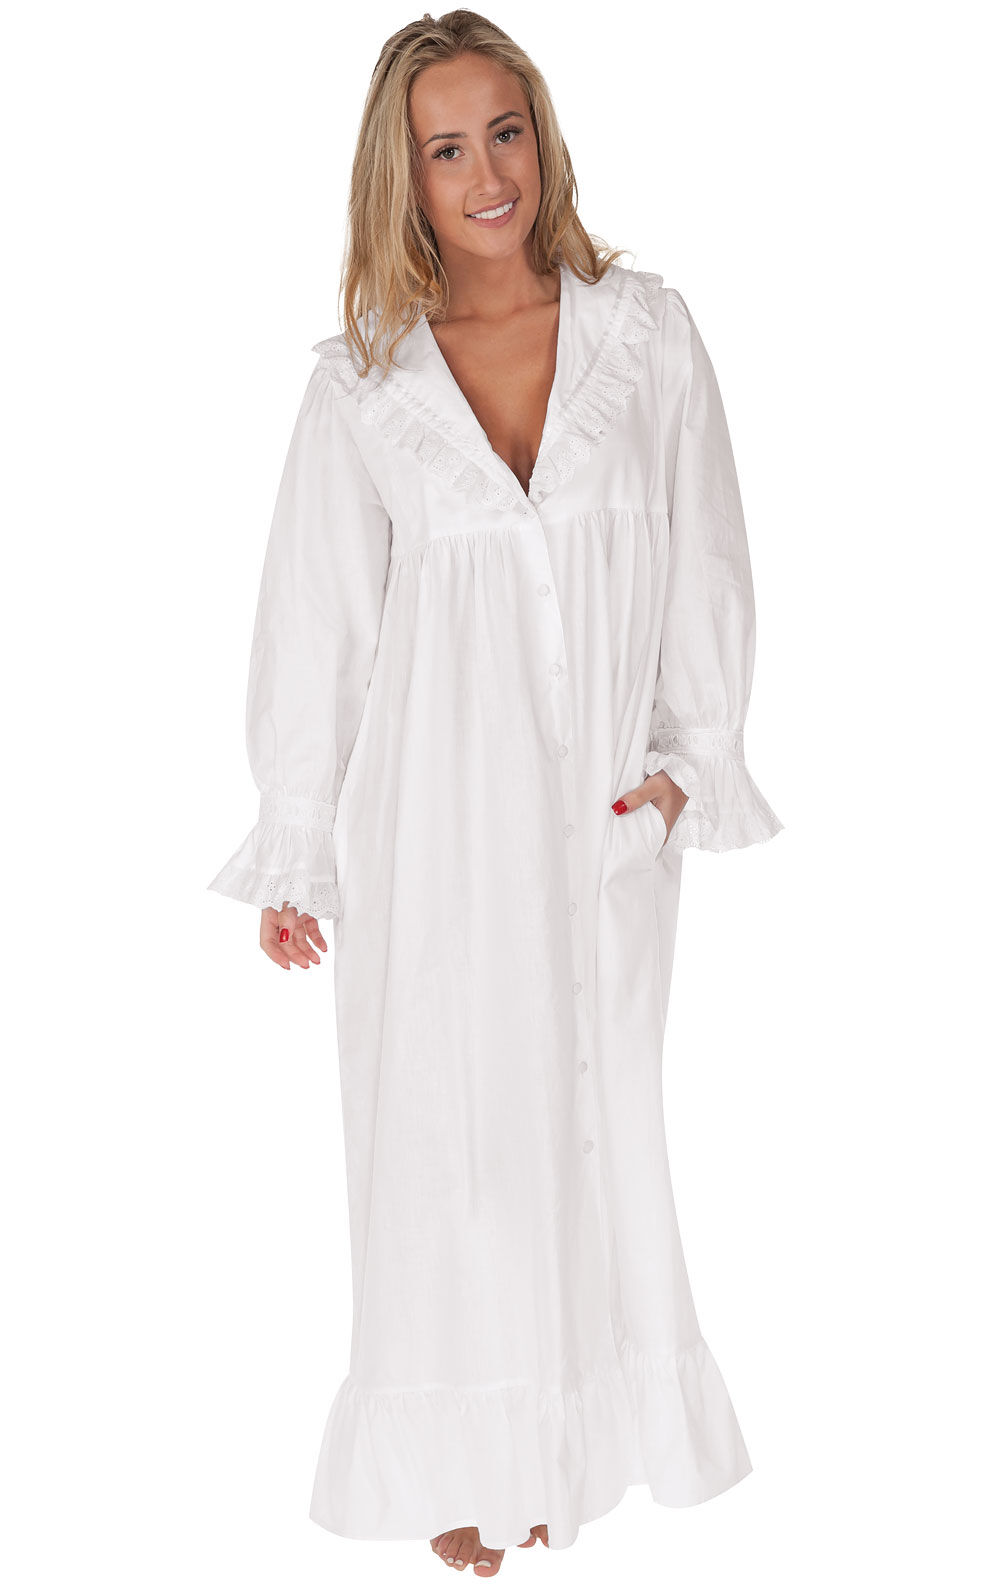 i-smalls Ladies Full Length Loose Fit 100% Brushed Cotton Nightdress with 3 Button Floral Panel Design M-3XL